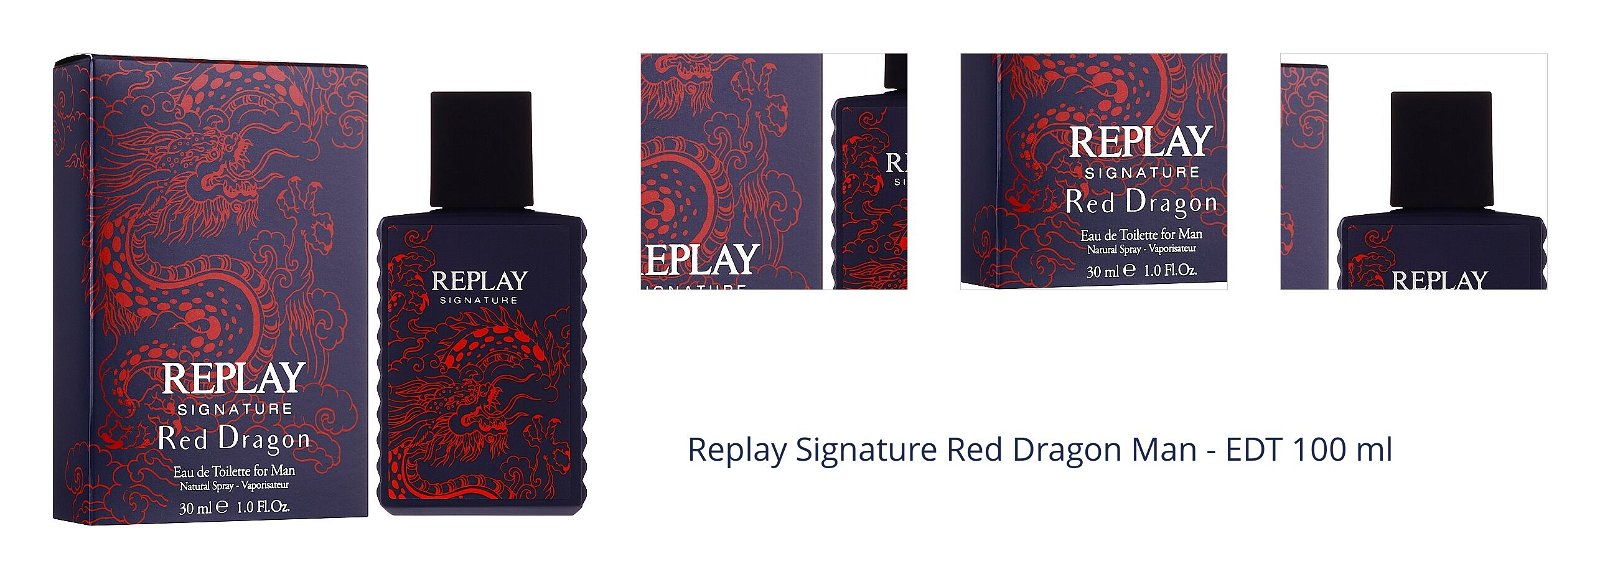 Replay Signature Red Dragon Man - EDT 100 ml 1